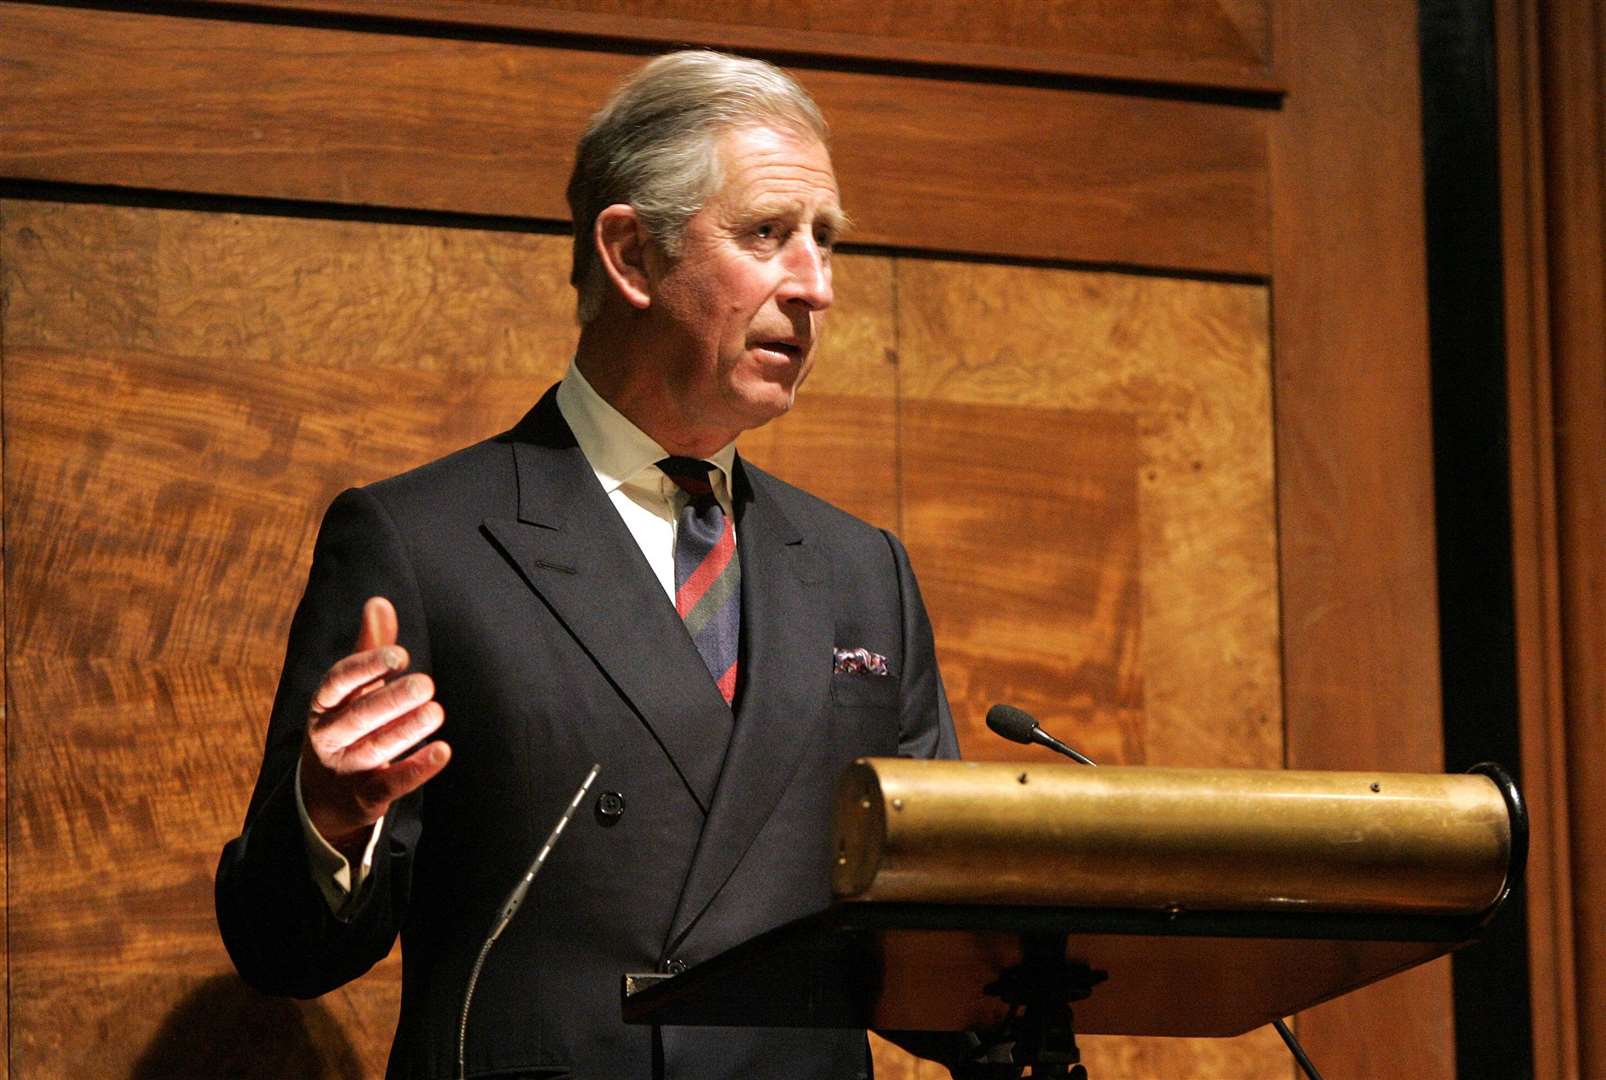 The Prince of Wales delivering his speech at the 2009 Royal Institute of British Architects (RIBA) Trust in London (Alastair Grant/PA )